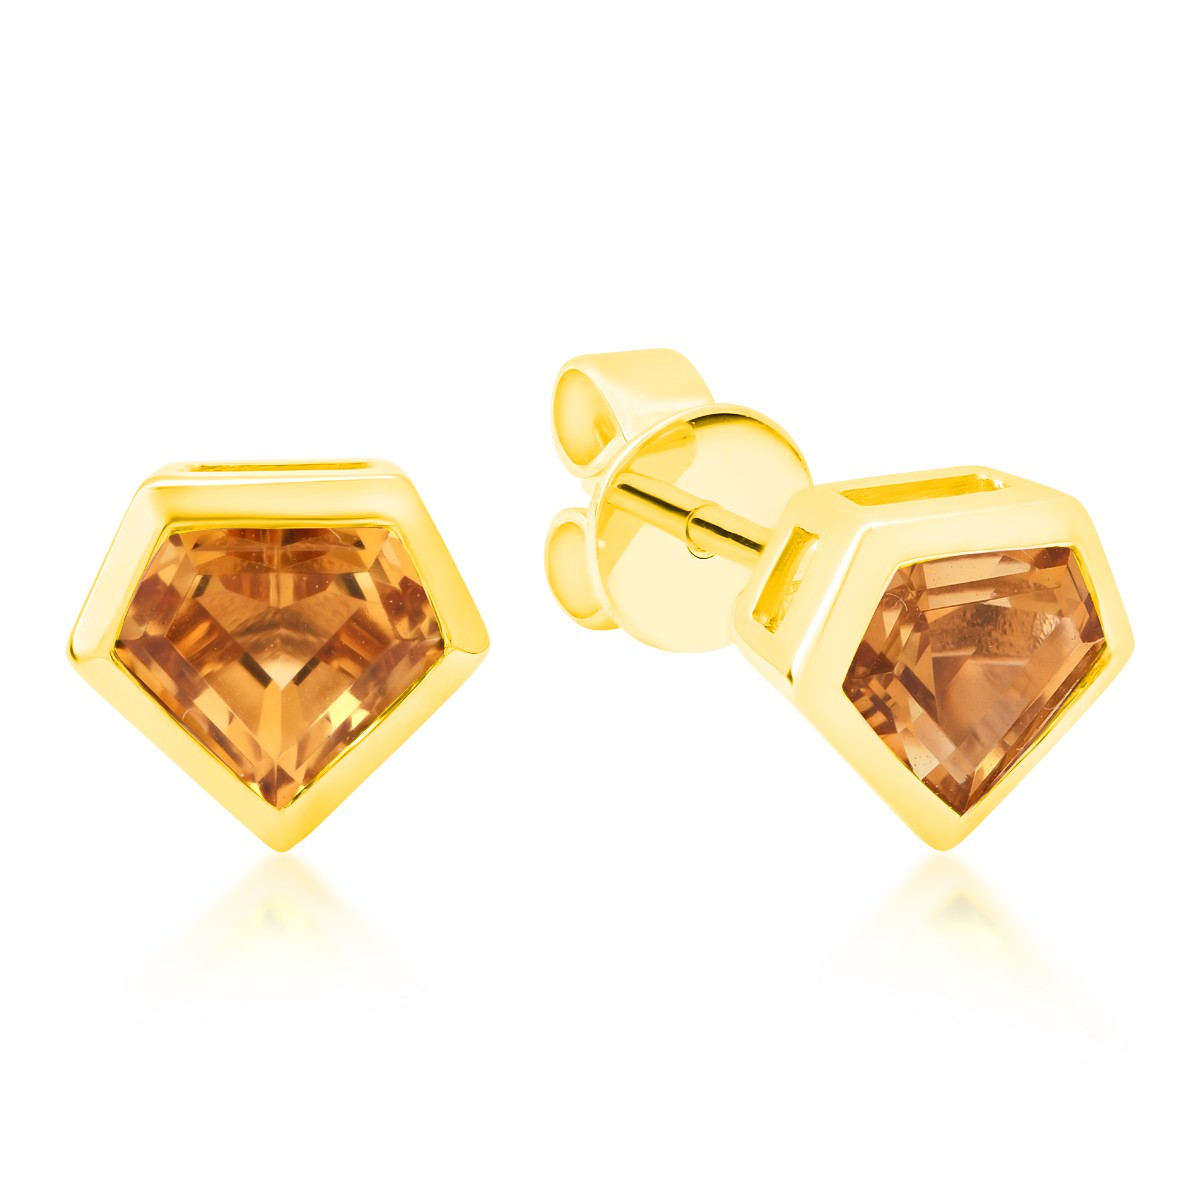 18K yellow gold earrings with 1.084ct citrine